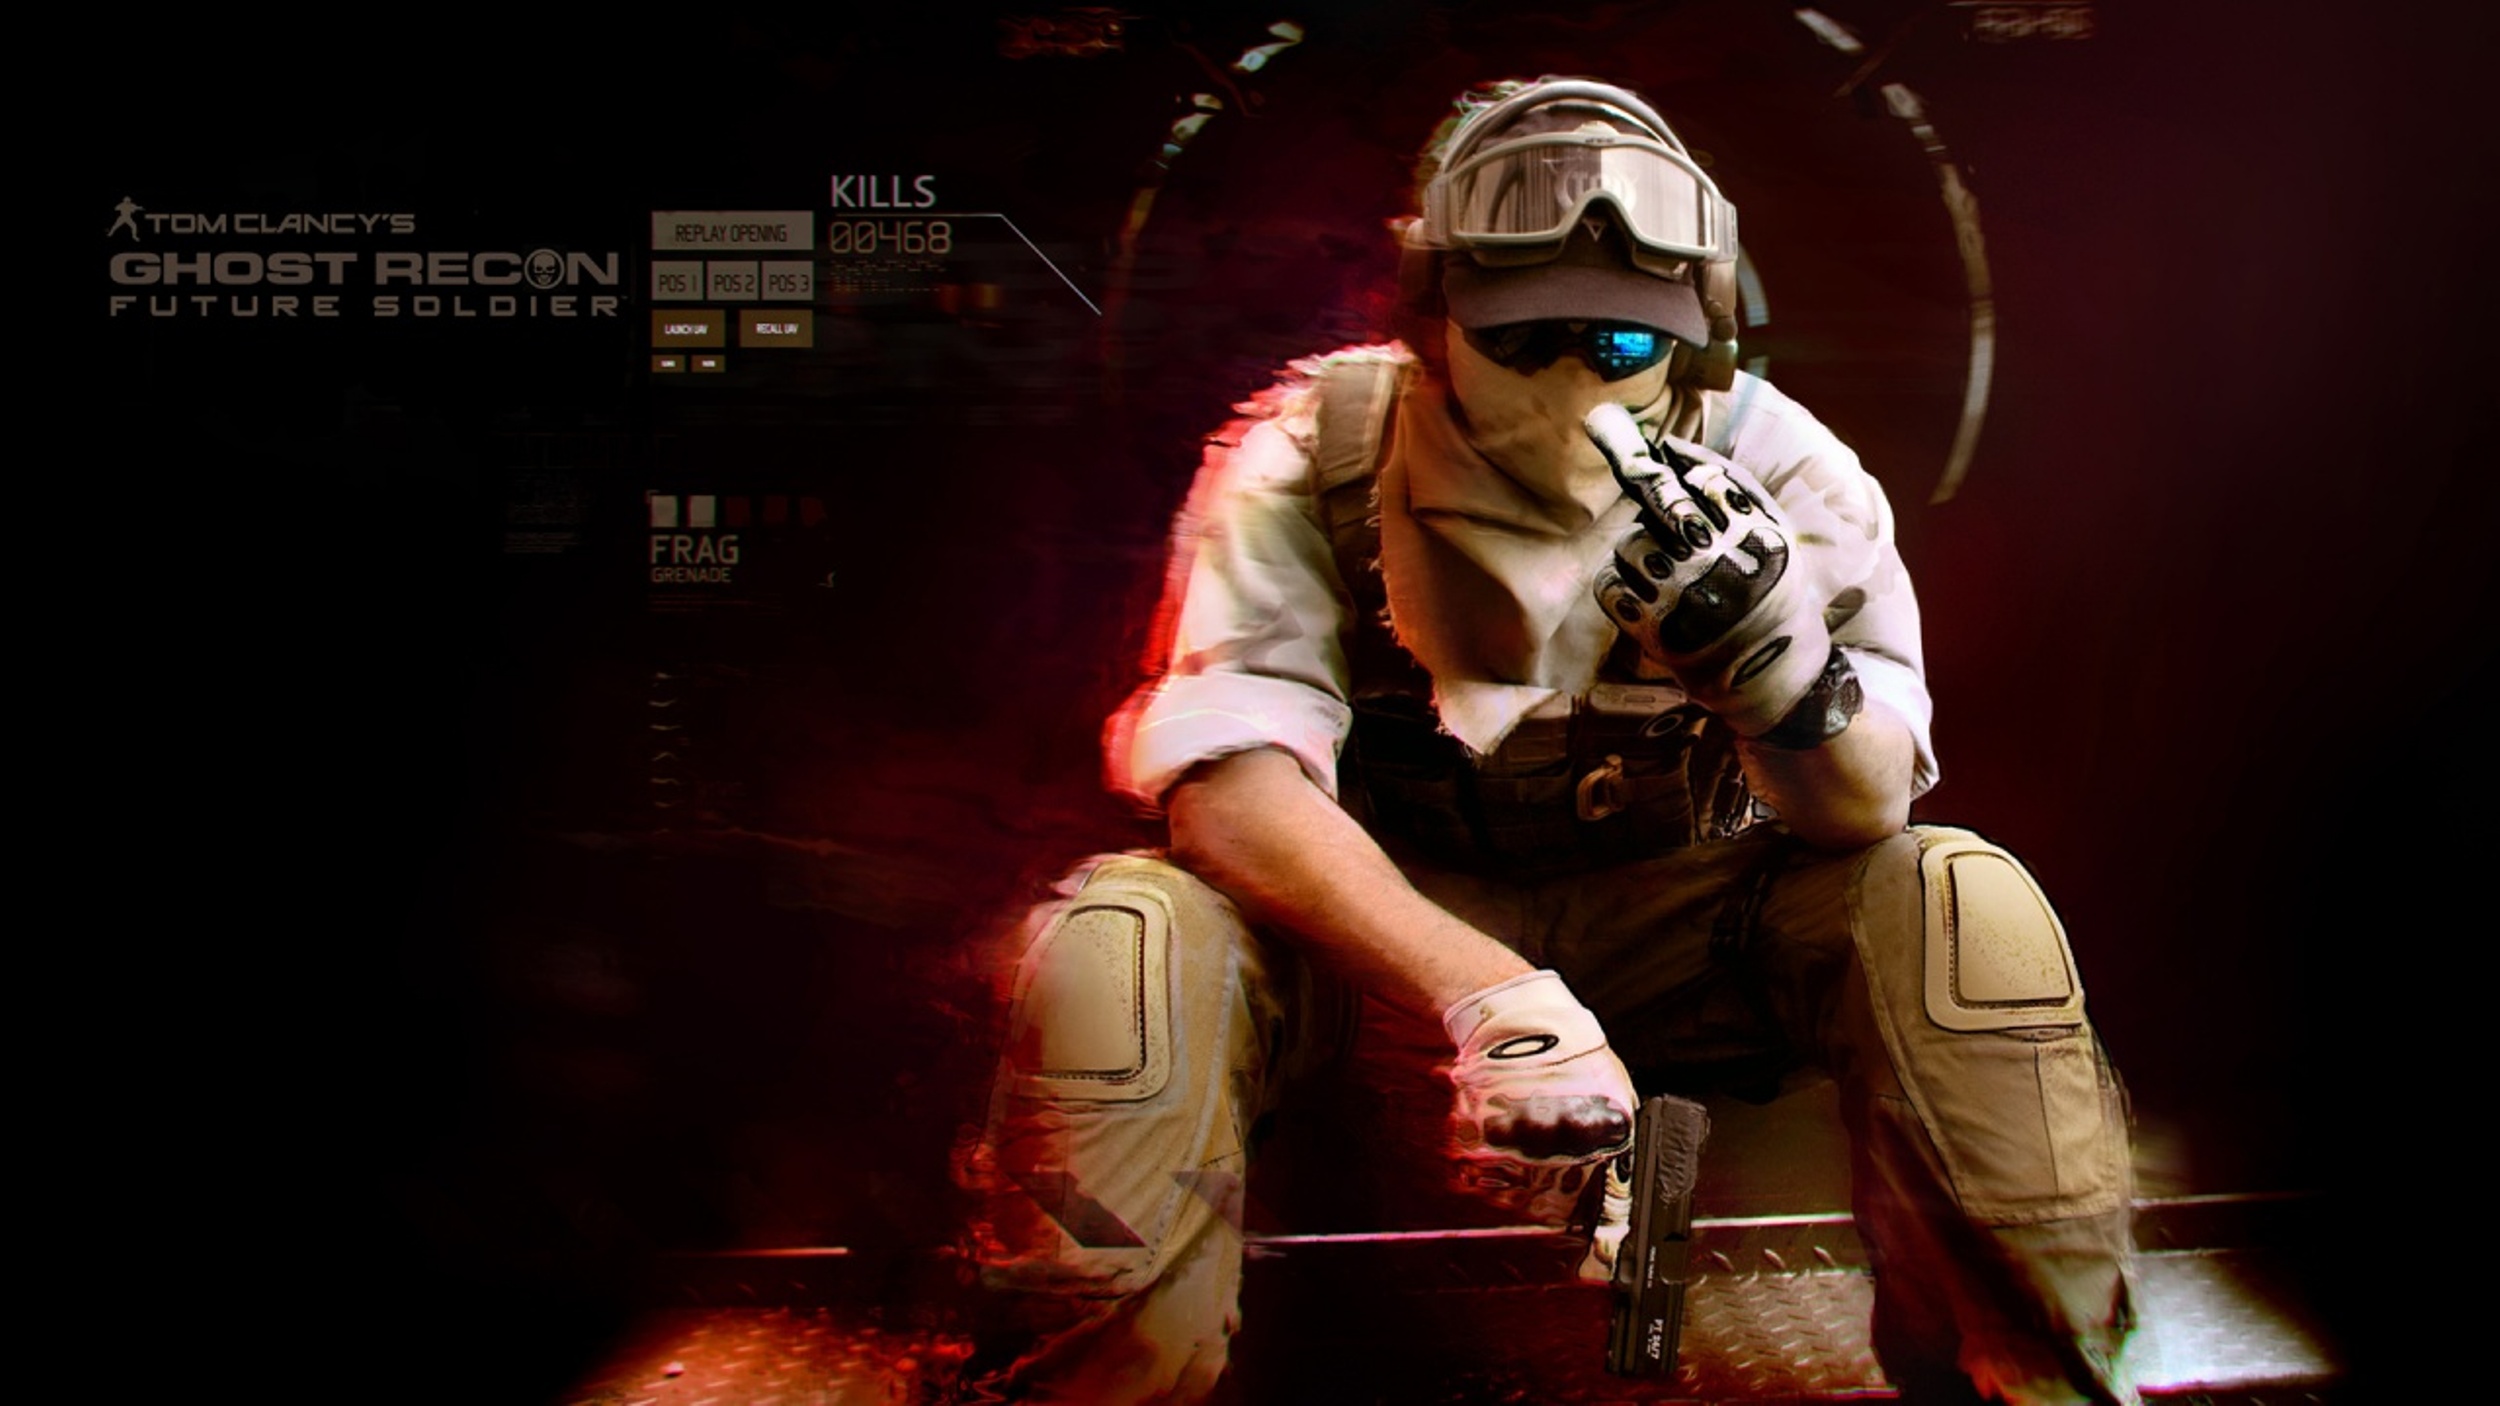 ghost recon, Recon, Warriors, Soldiers, Military, Clancy, Weapons, Guns, Pistols, Sadic, Humor, Mask, War Wallpaper